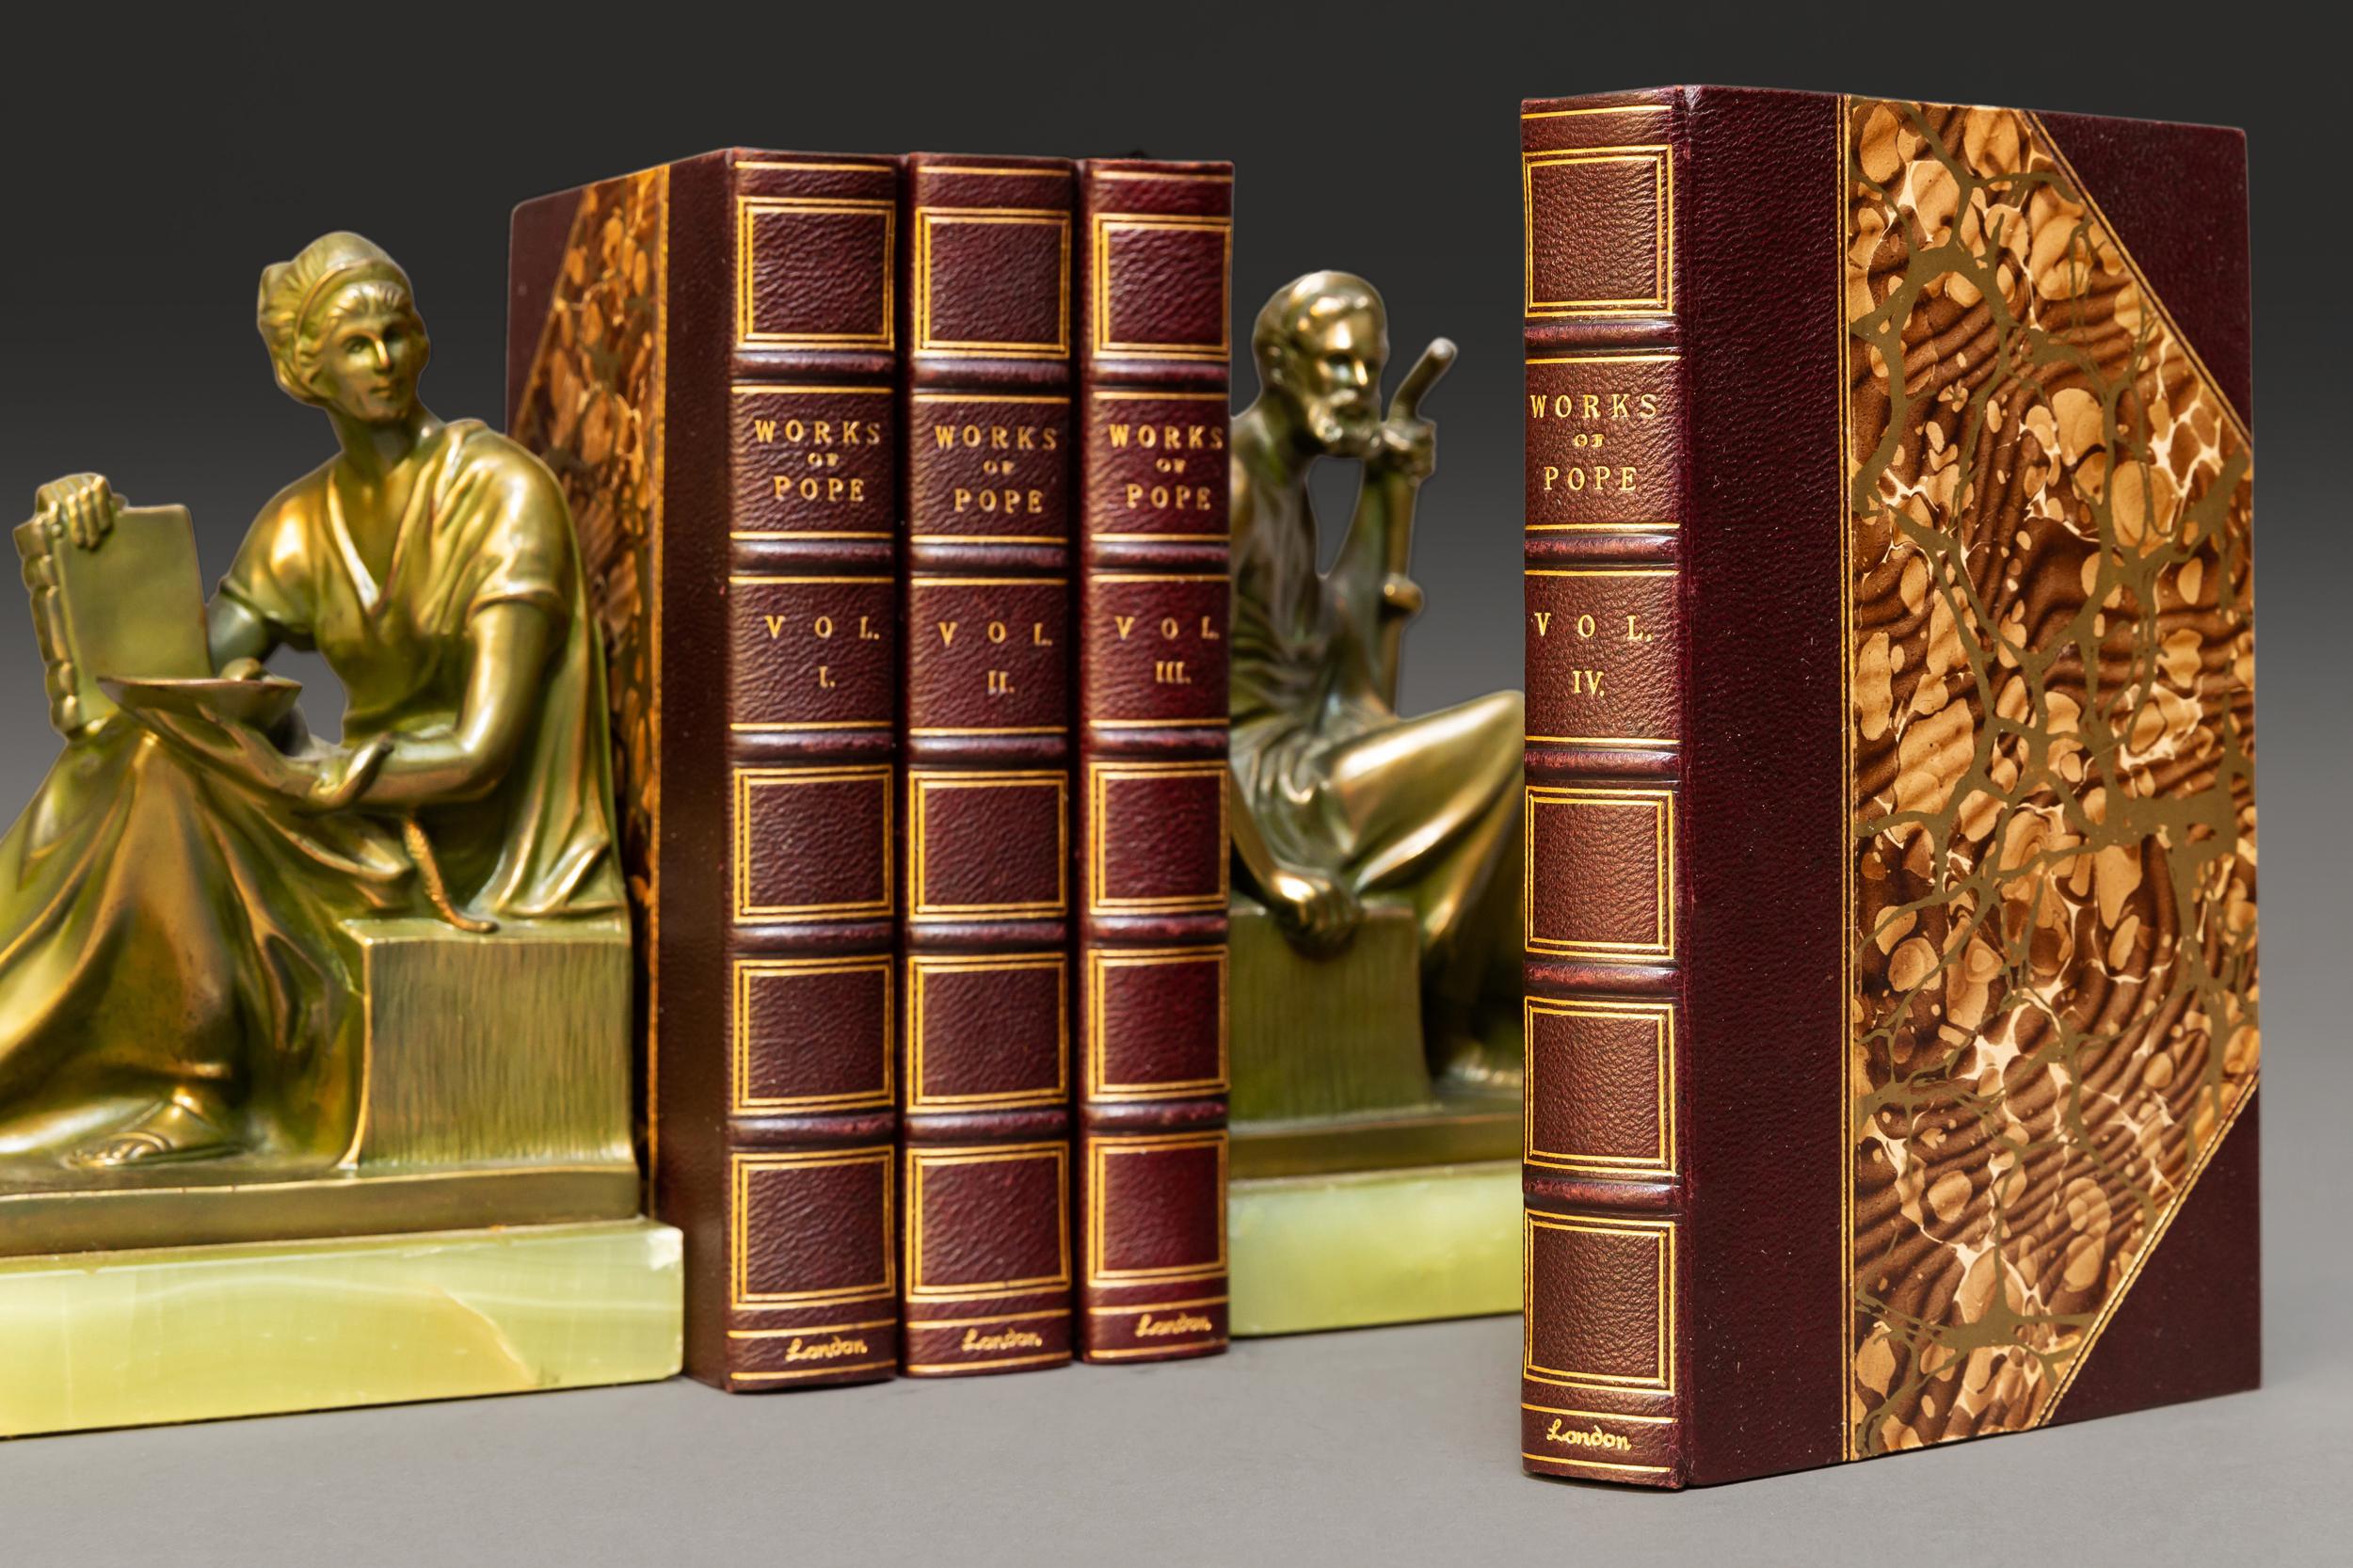 4 Volumes. Alexander Pope. The Works and memoirs. With notes & notices by Rev. G. Croly. With frontispieces. Bound in 3/4 black morocco. Marbled boards, marbled endpapers, gilt on spines & covers, raised bands, top edges gilt. 
Published: London: